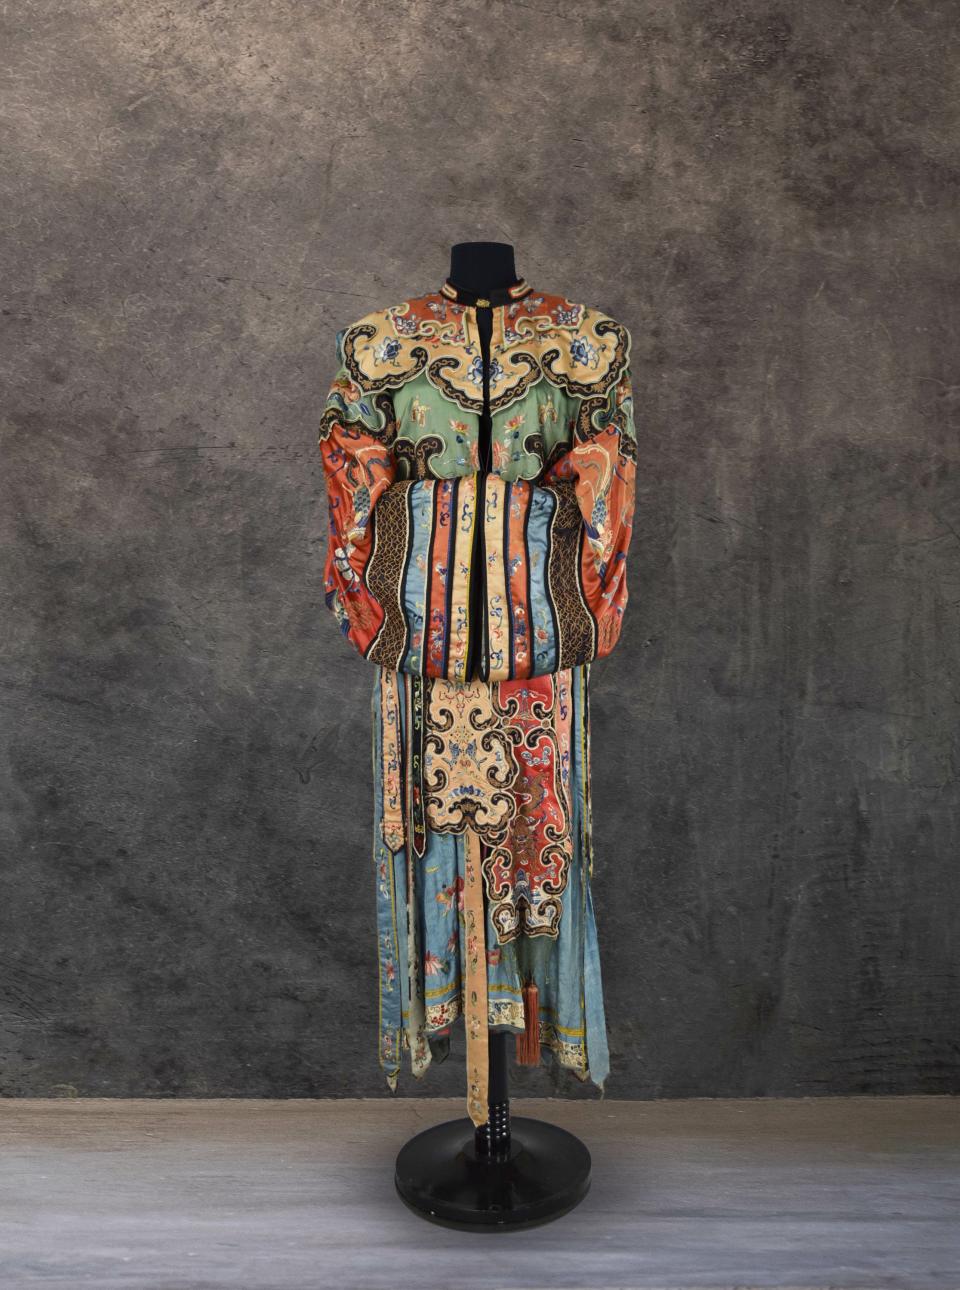 Pieces for “The Silk Road” exhibit at OSU-Marion are on loan from The Ohio State University’s Historic Costumes and Textiles Collection, the Orton Geological Museum, and the Department of History.